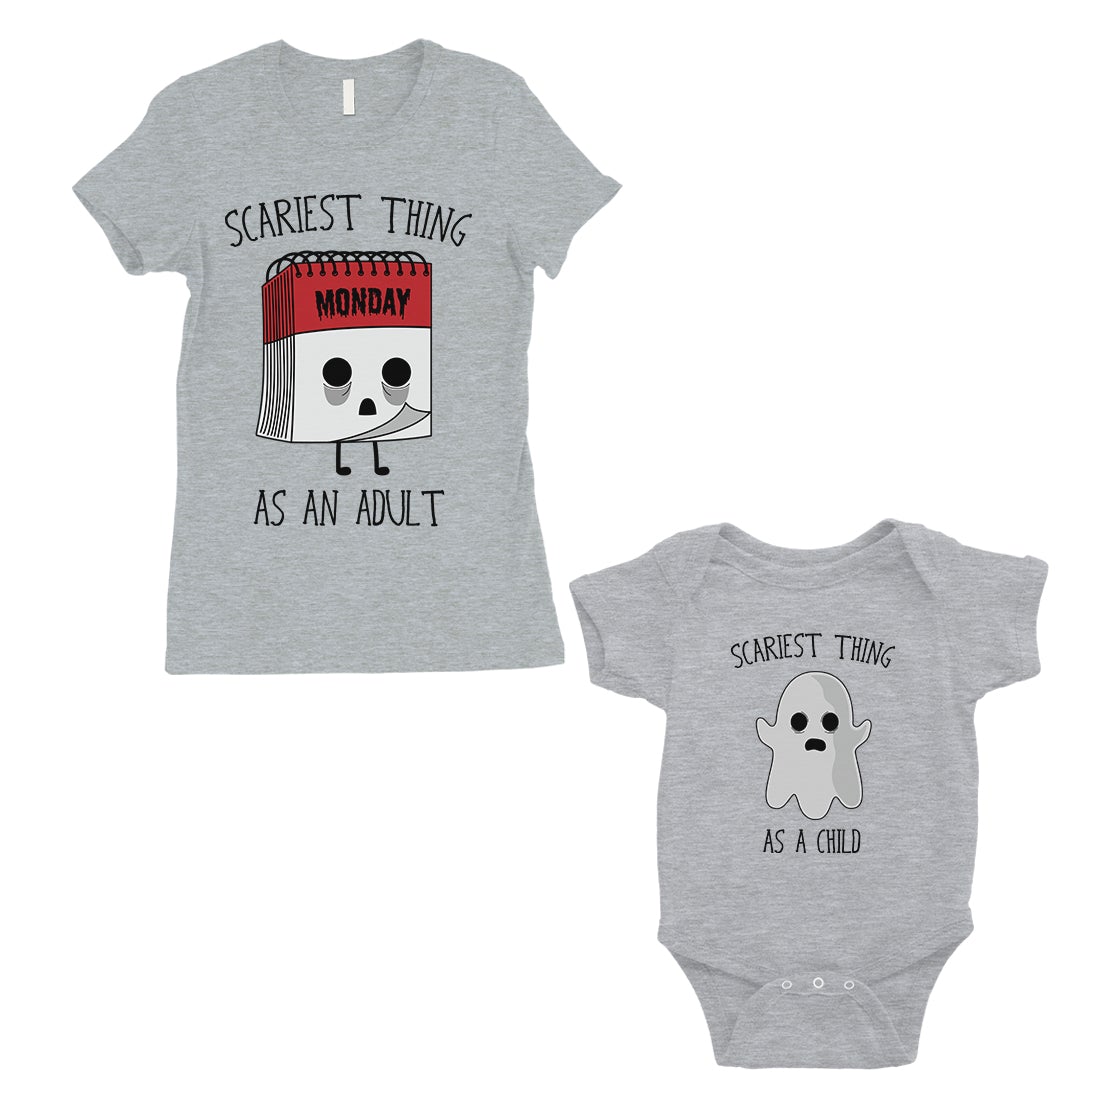 Scariest As Adult Child Mom and Baby Matching Gift T-Shirts Gray